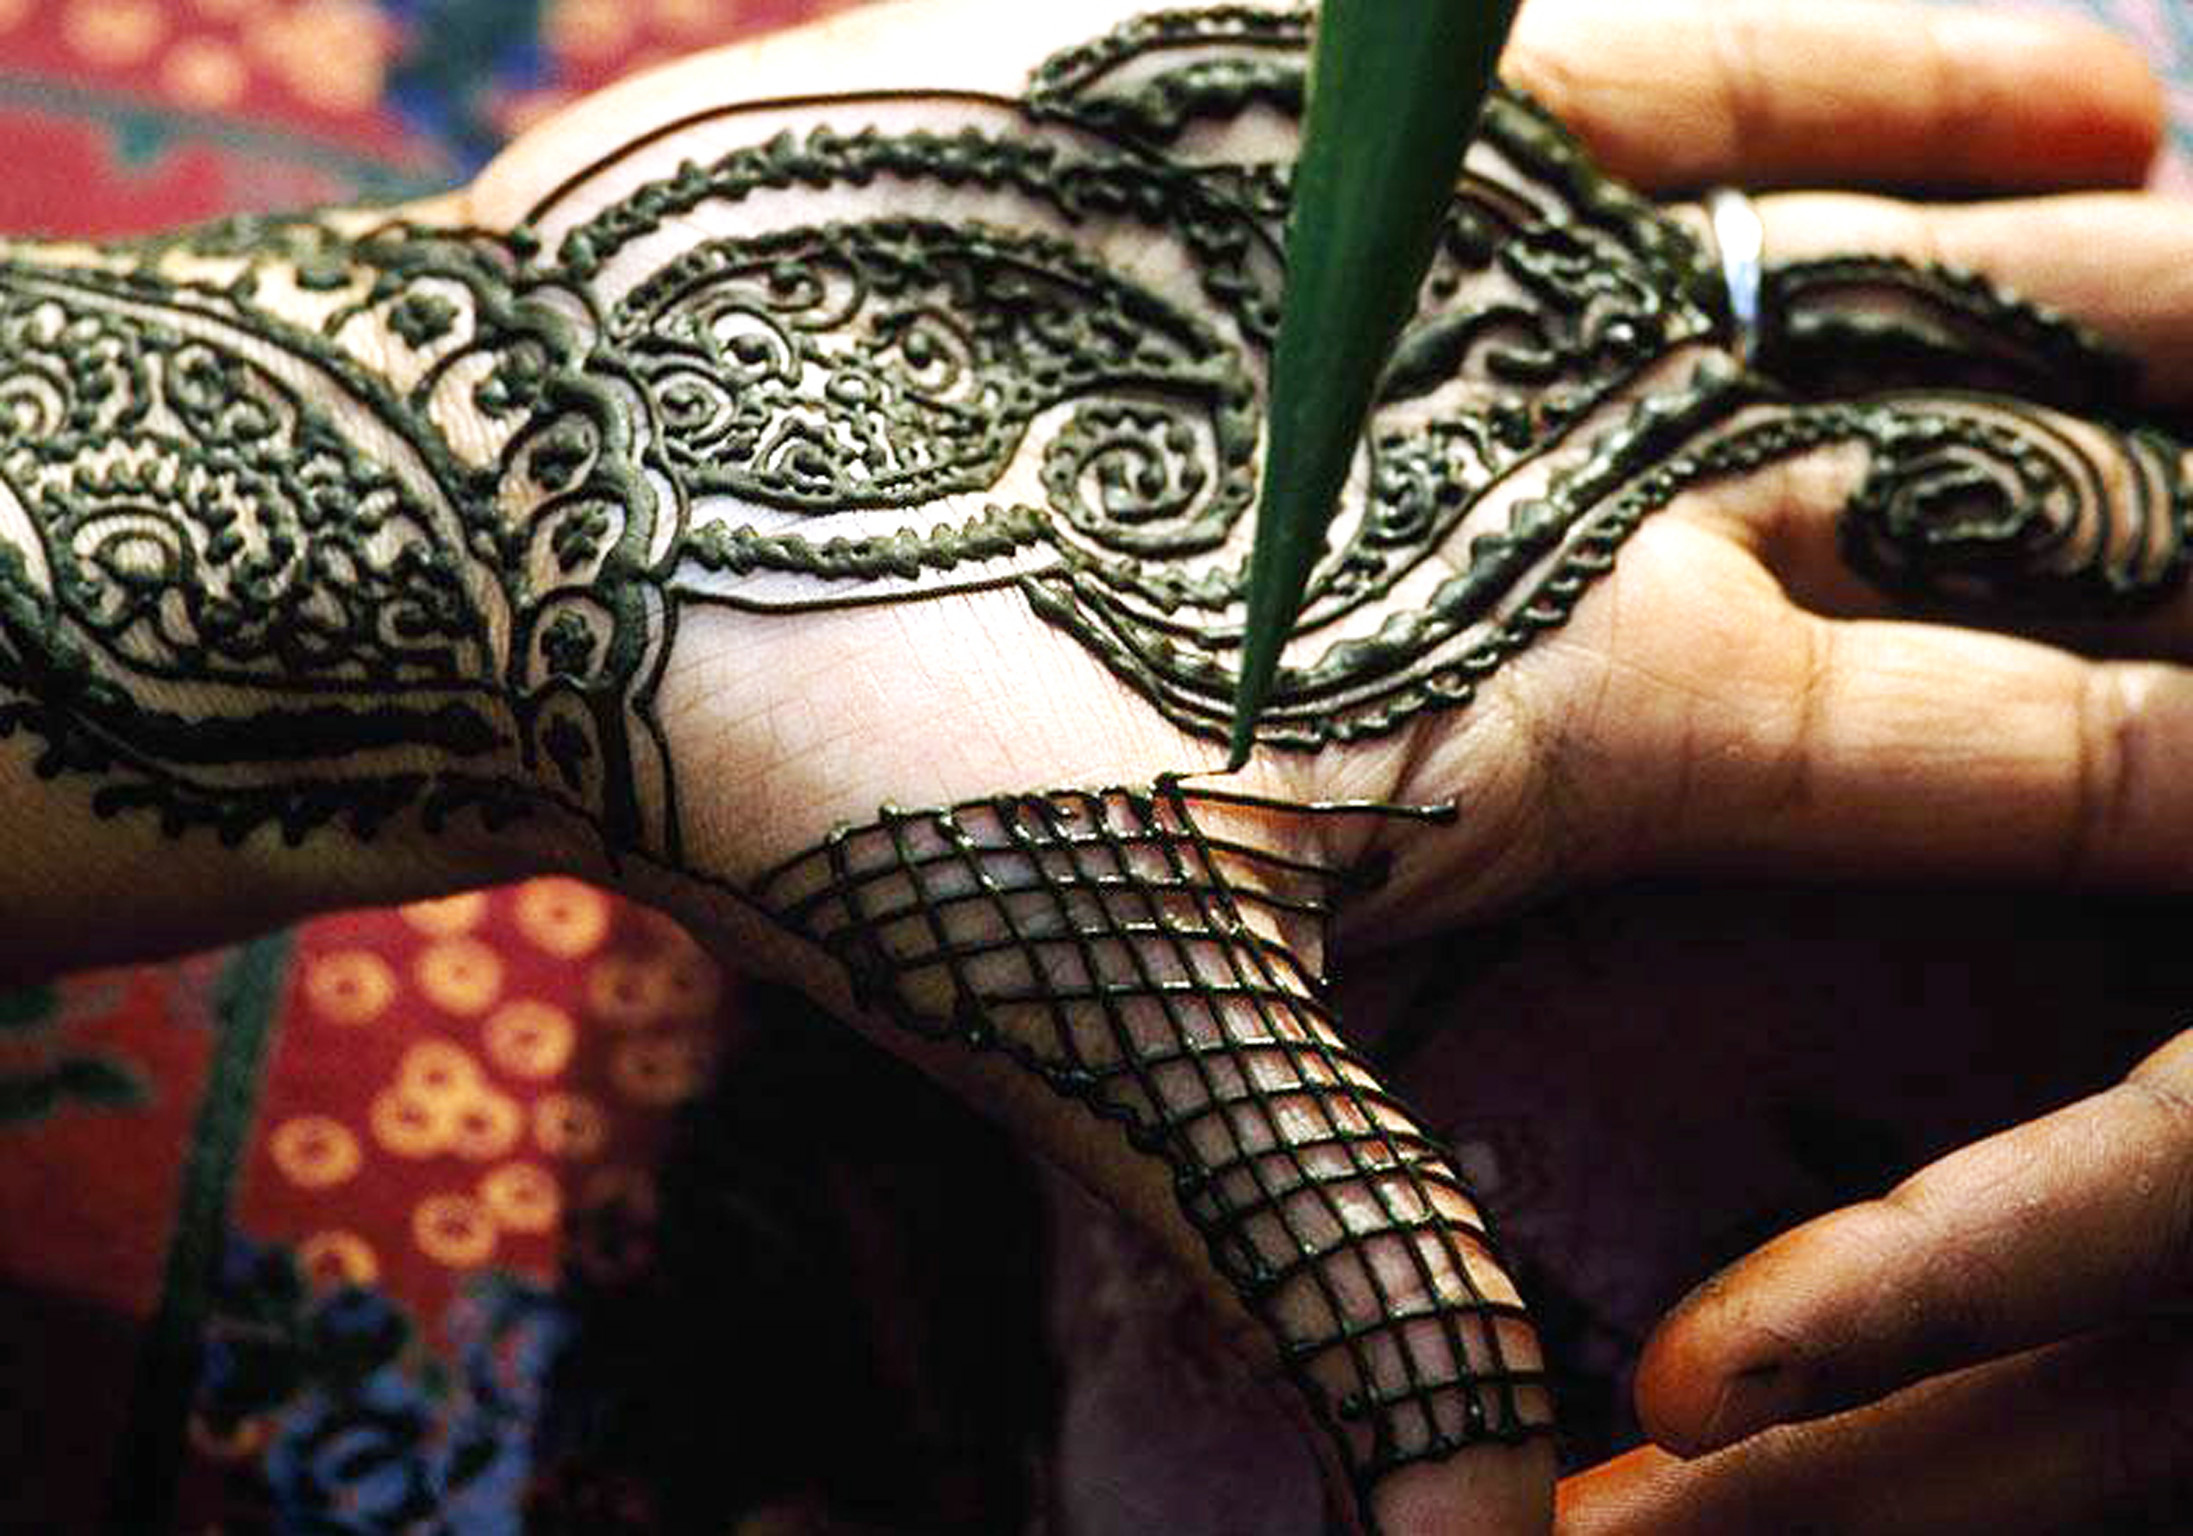 Henna and Temporary Tattoos Can Cause an Allergic Reaction | Time